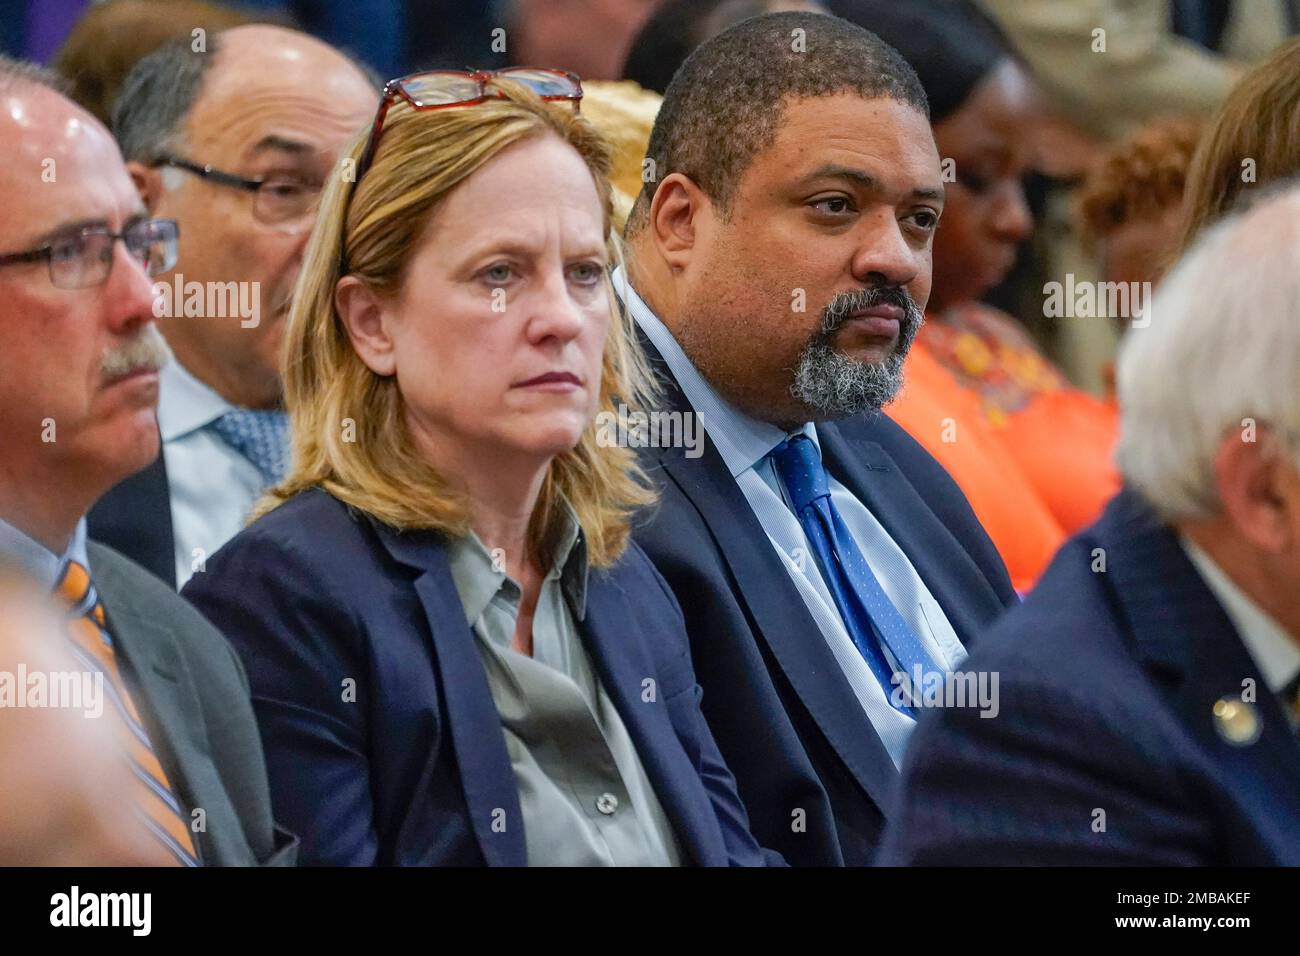 Alvin Bragg, right, New York County District Attorney, and Melinda Katz,  Queens County District Attorney attend a ceremony where Gov. Kathy Hochul  signed a package of bills to strengthen gun laws, Monday,